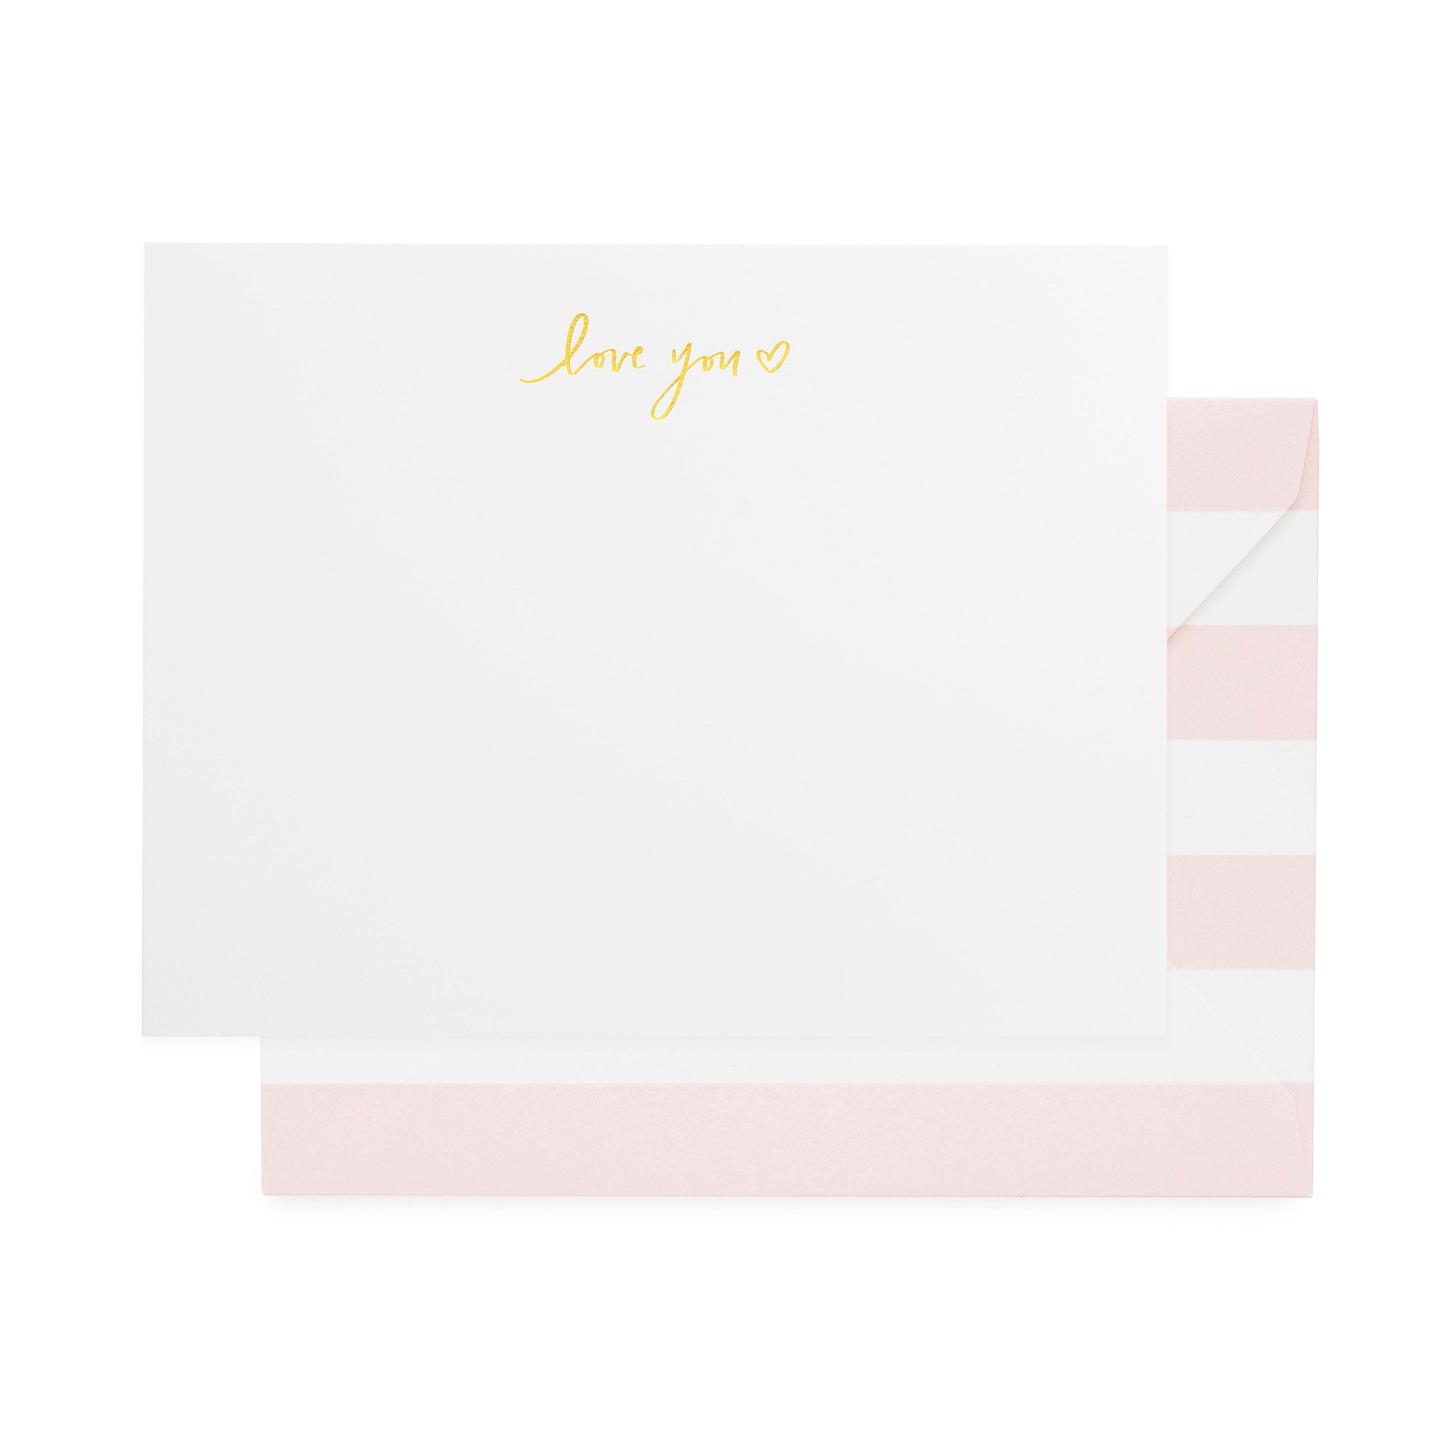 white cards with love you heart in goil foil note set with pink and white striped envelopes